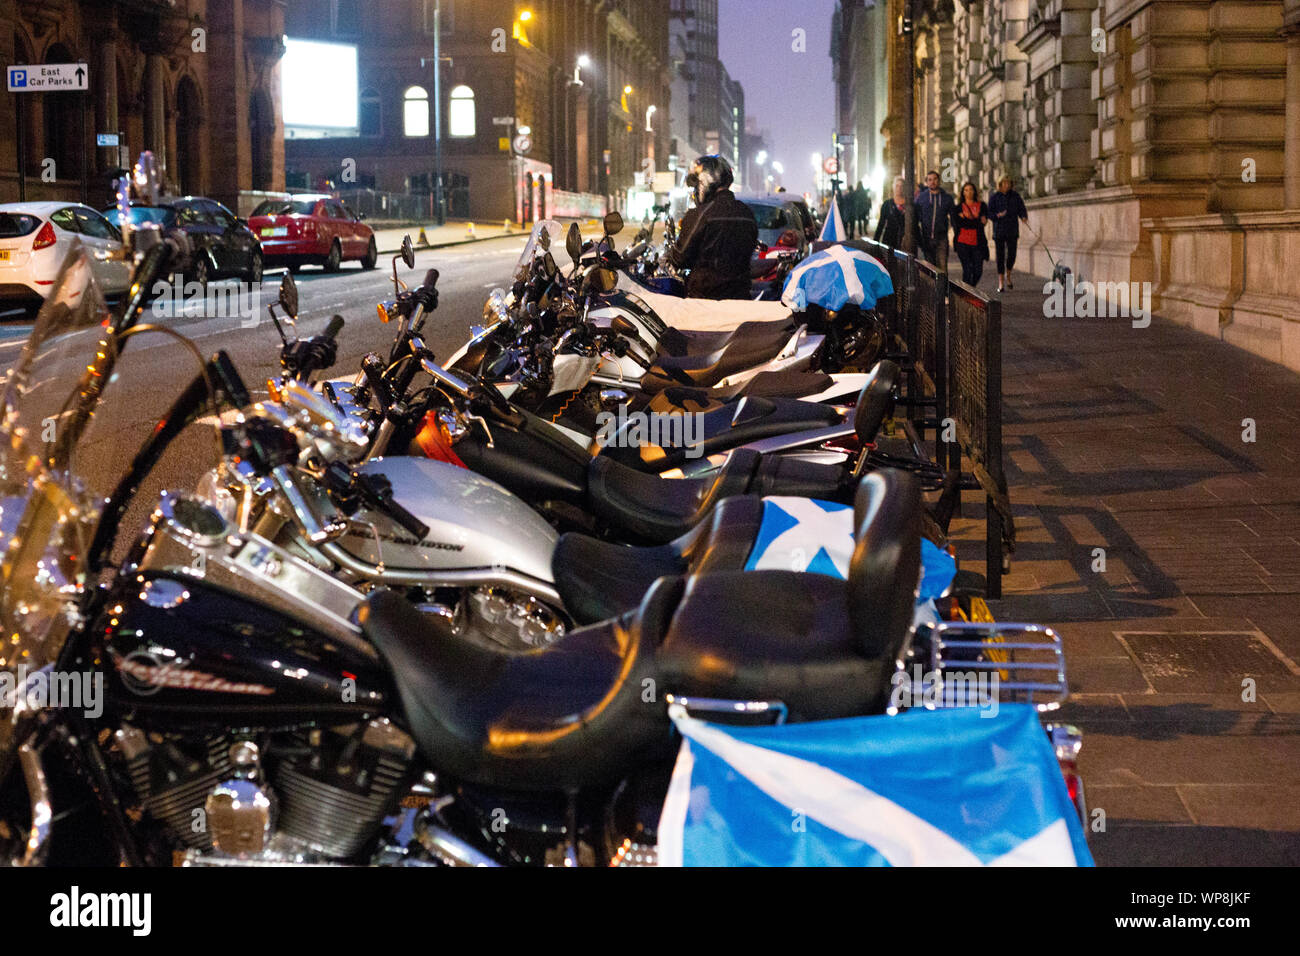 Motorbikes parked in Glasgow decorated with Scottish flags during  Scottish Independence rally in George Square, Glasgow, UK 2014 Stock Photo